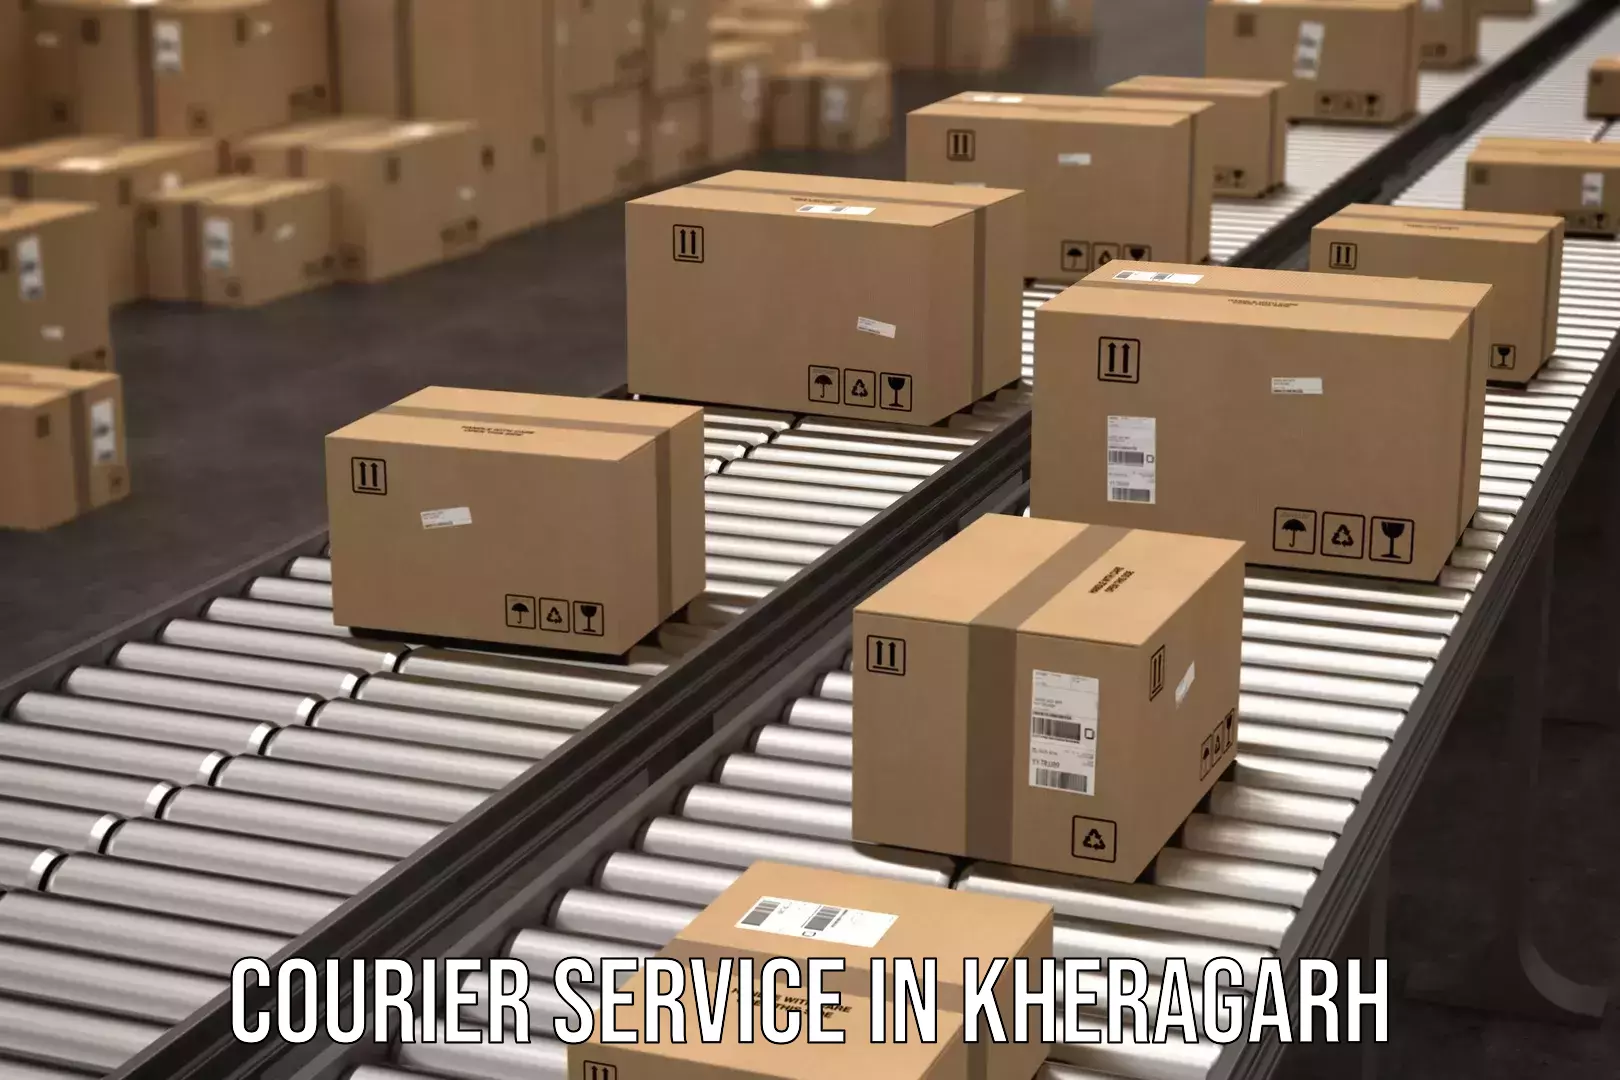 Sustainable courier practices in Kheragarh